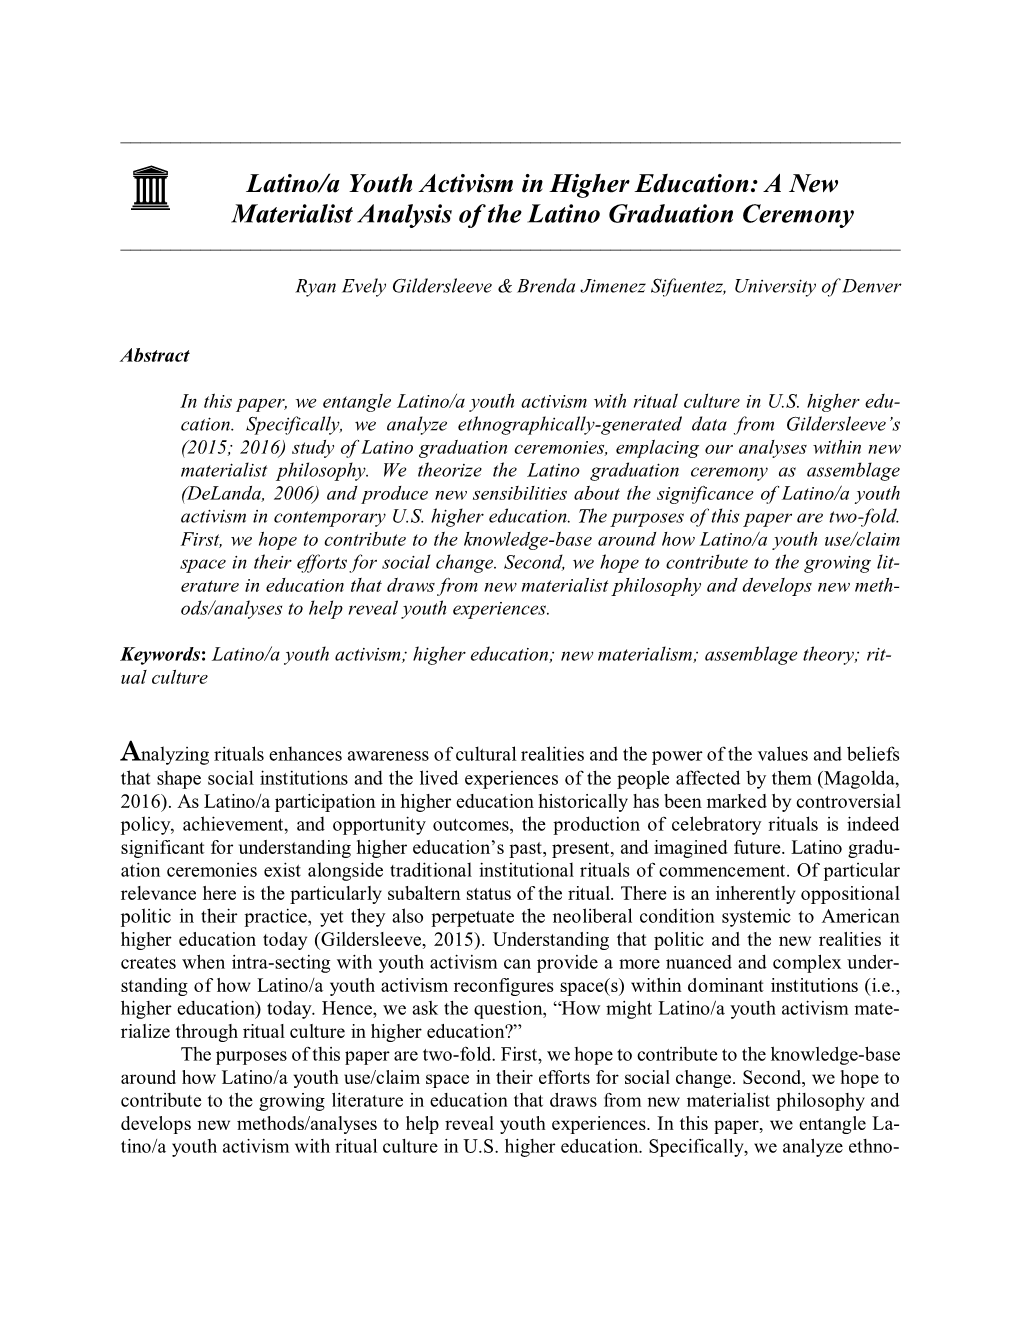 Latino/A Youth Activism in Higher Education: a New Materialist Analysis of the Latino Graduation Ceremony ______